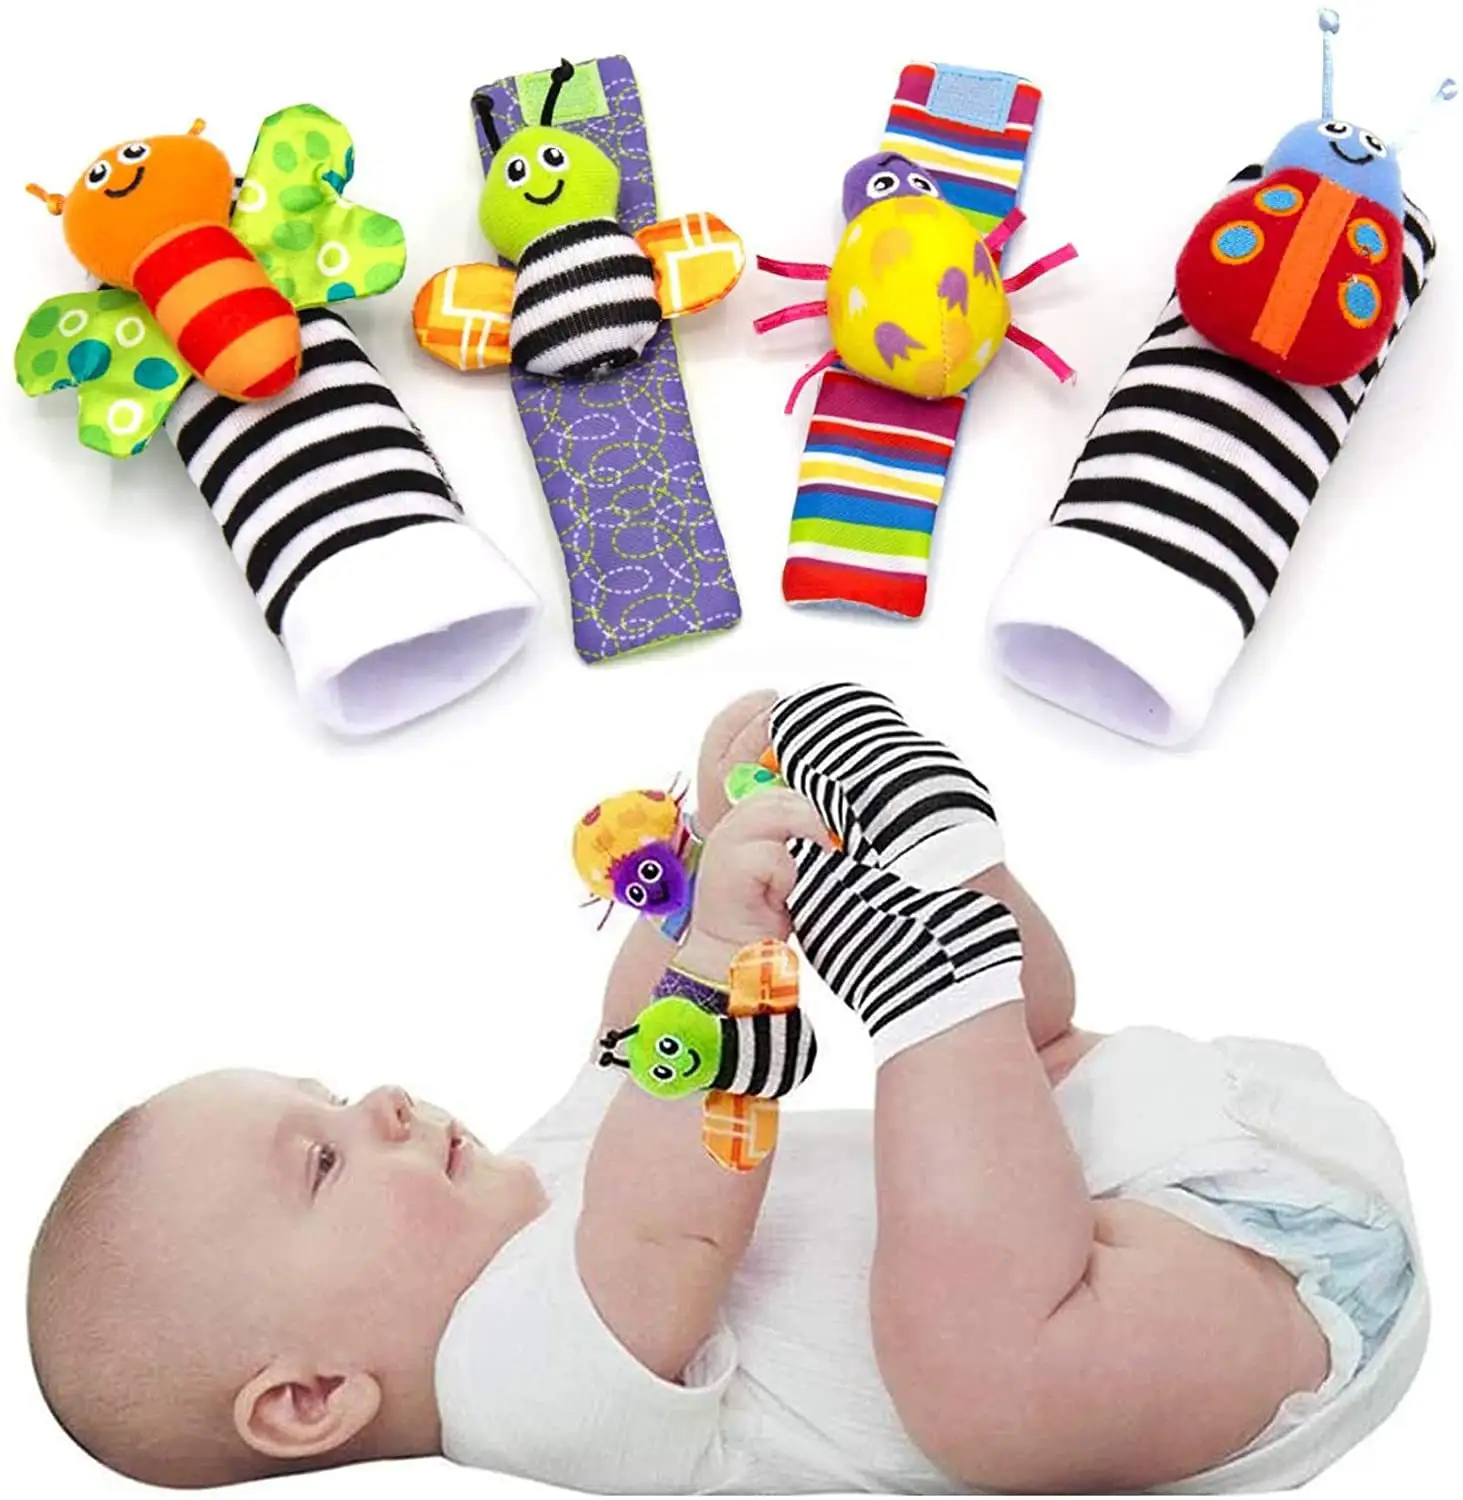 A527 4Pcs Baby Cartoon Cute Soft Wrist Strap Cotton Socks Toys Set Rattles Gift Wrist Rattles And Foot Finder For Toddler